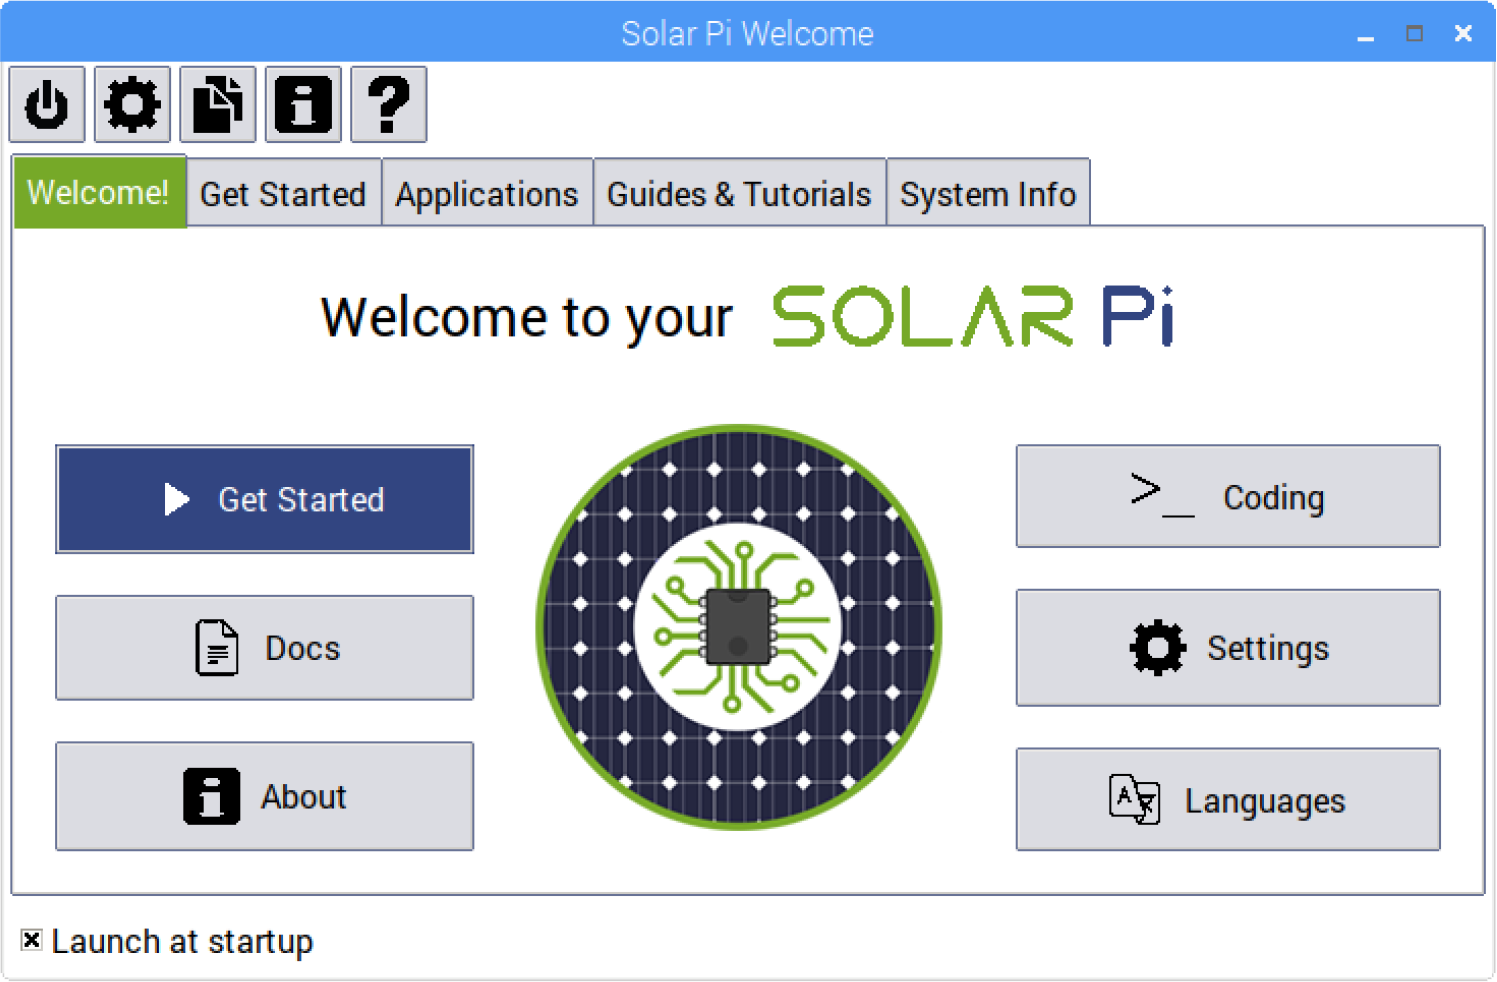 The Solar Pi Welcome application